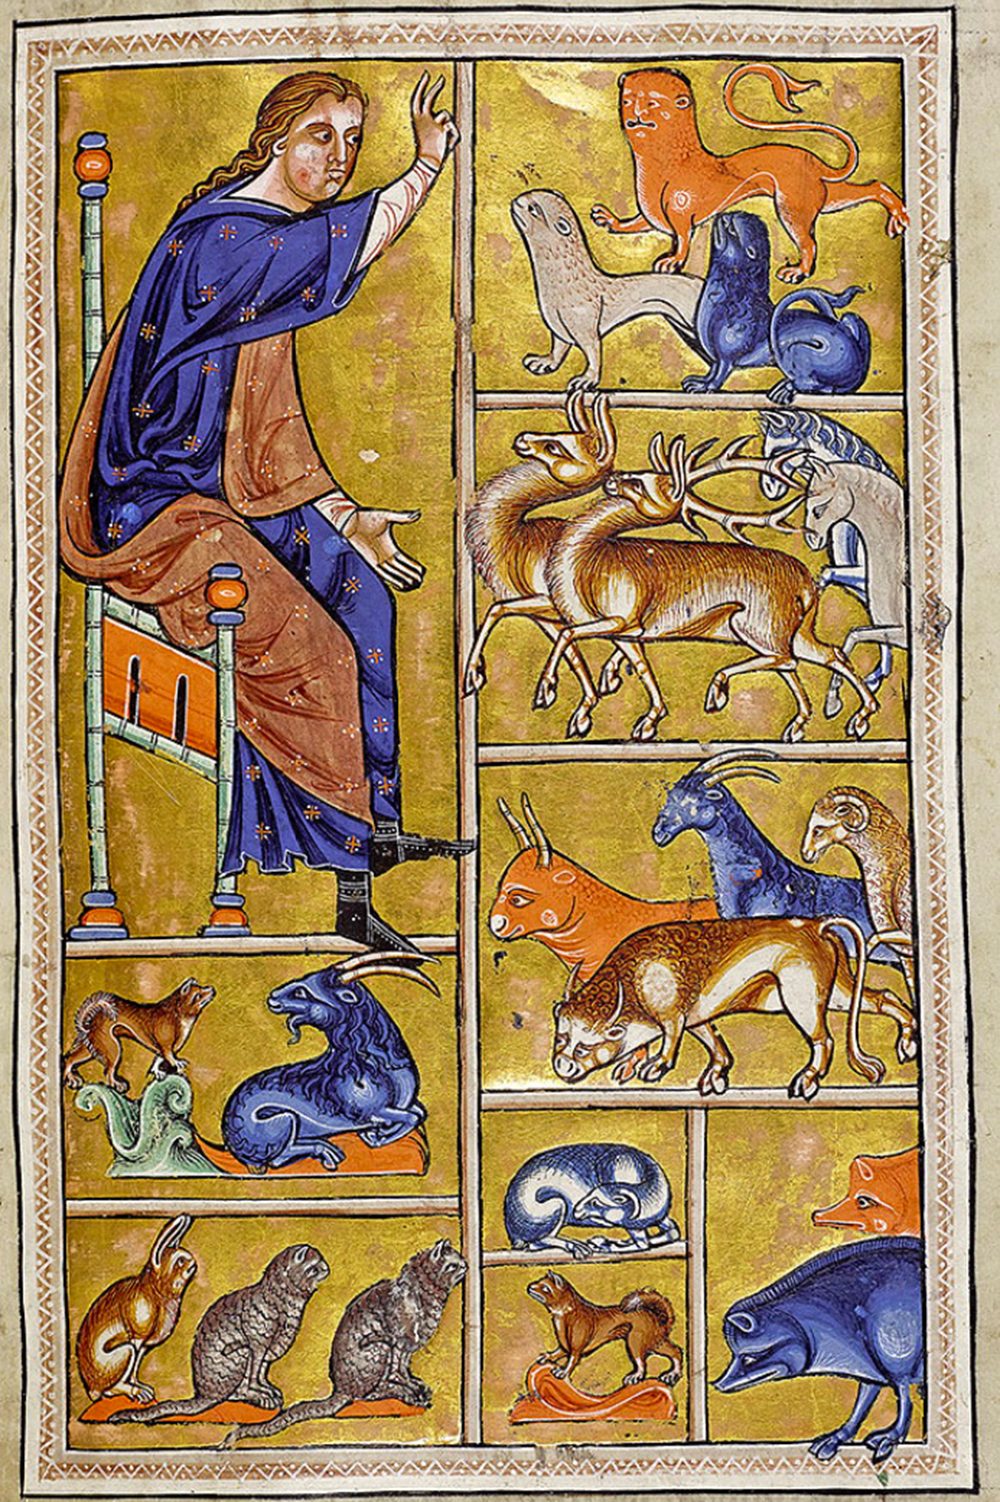 A page from the Aberdeen bestiary book, featuring a variety of fantastical animals of various shapes and colors.